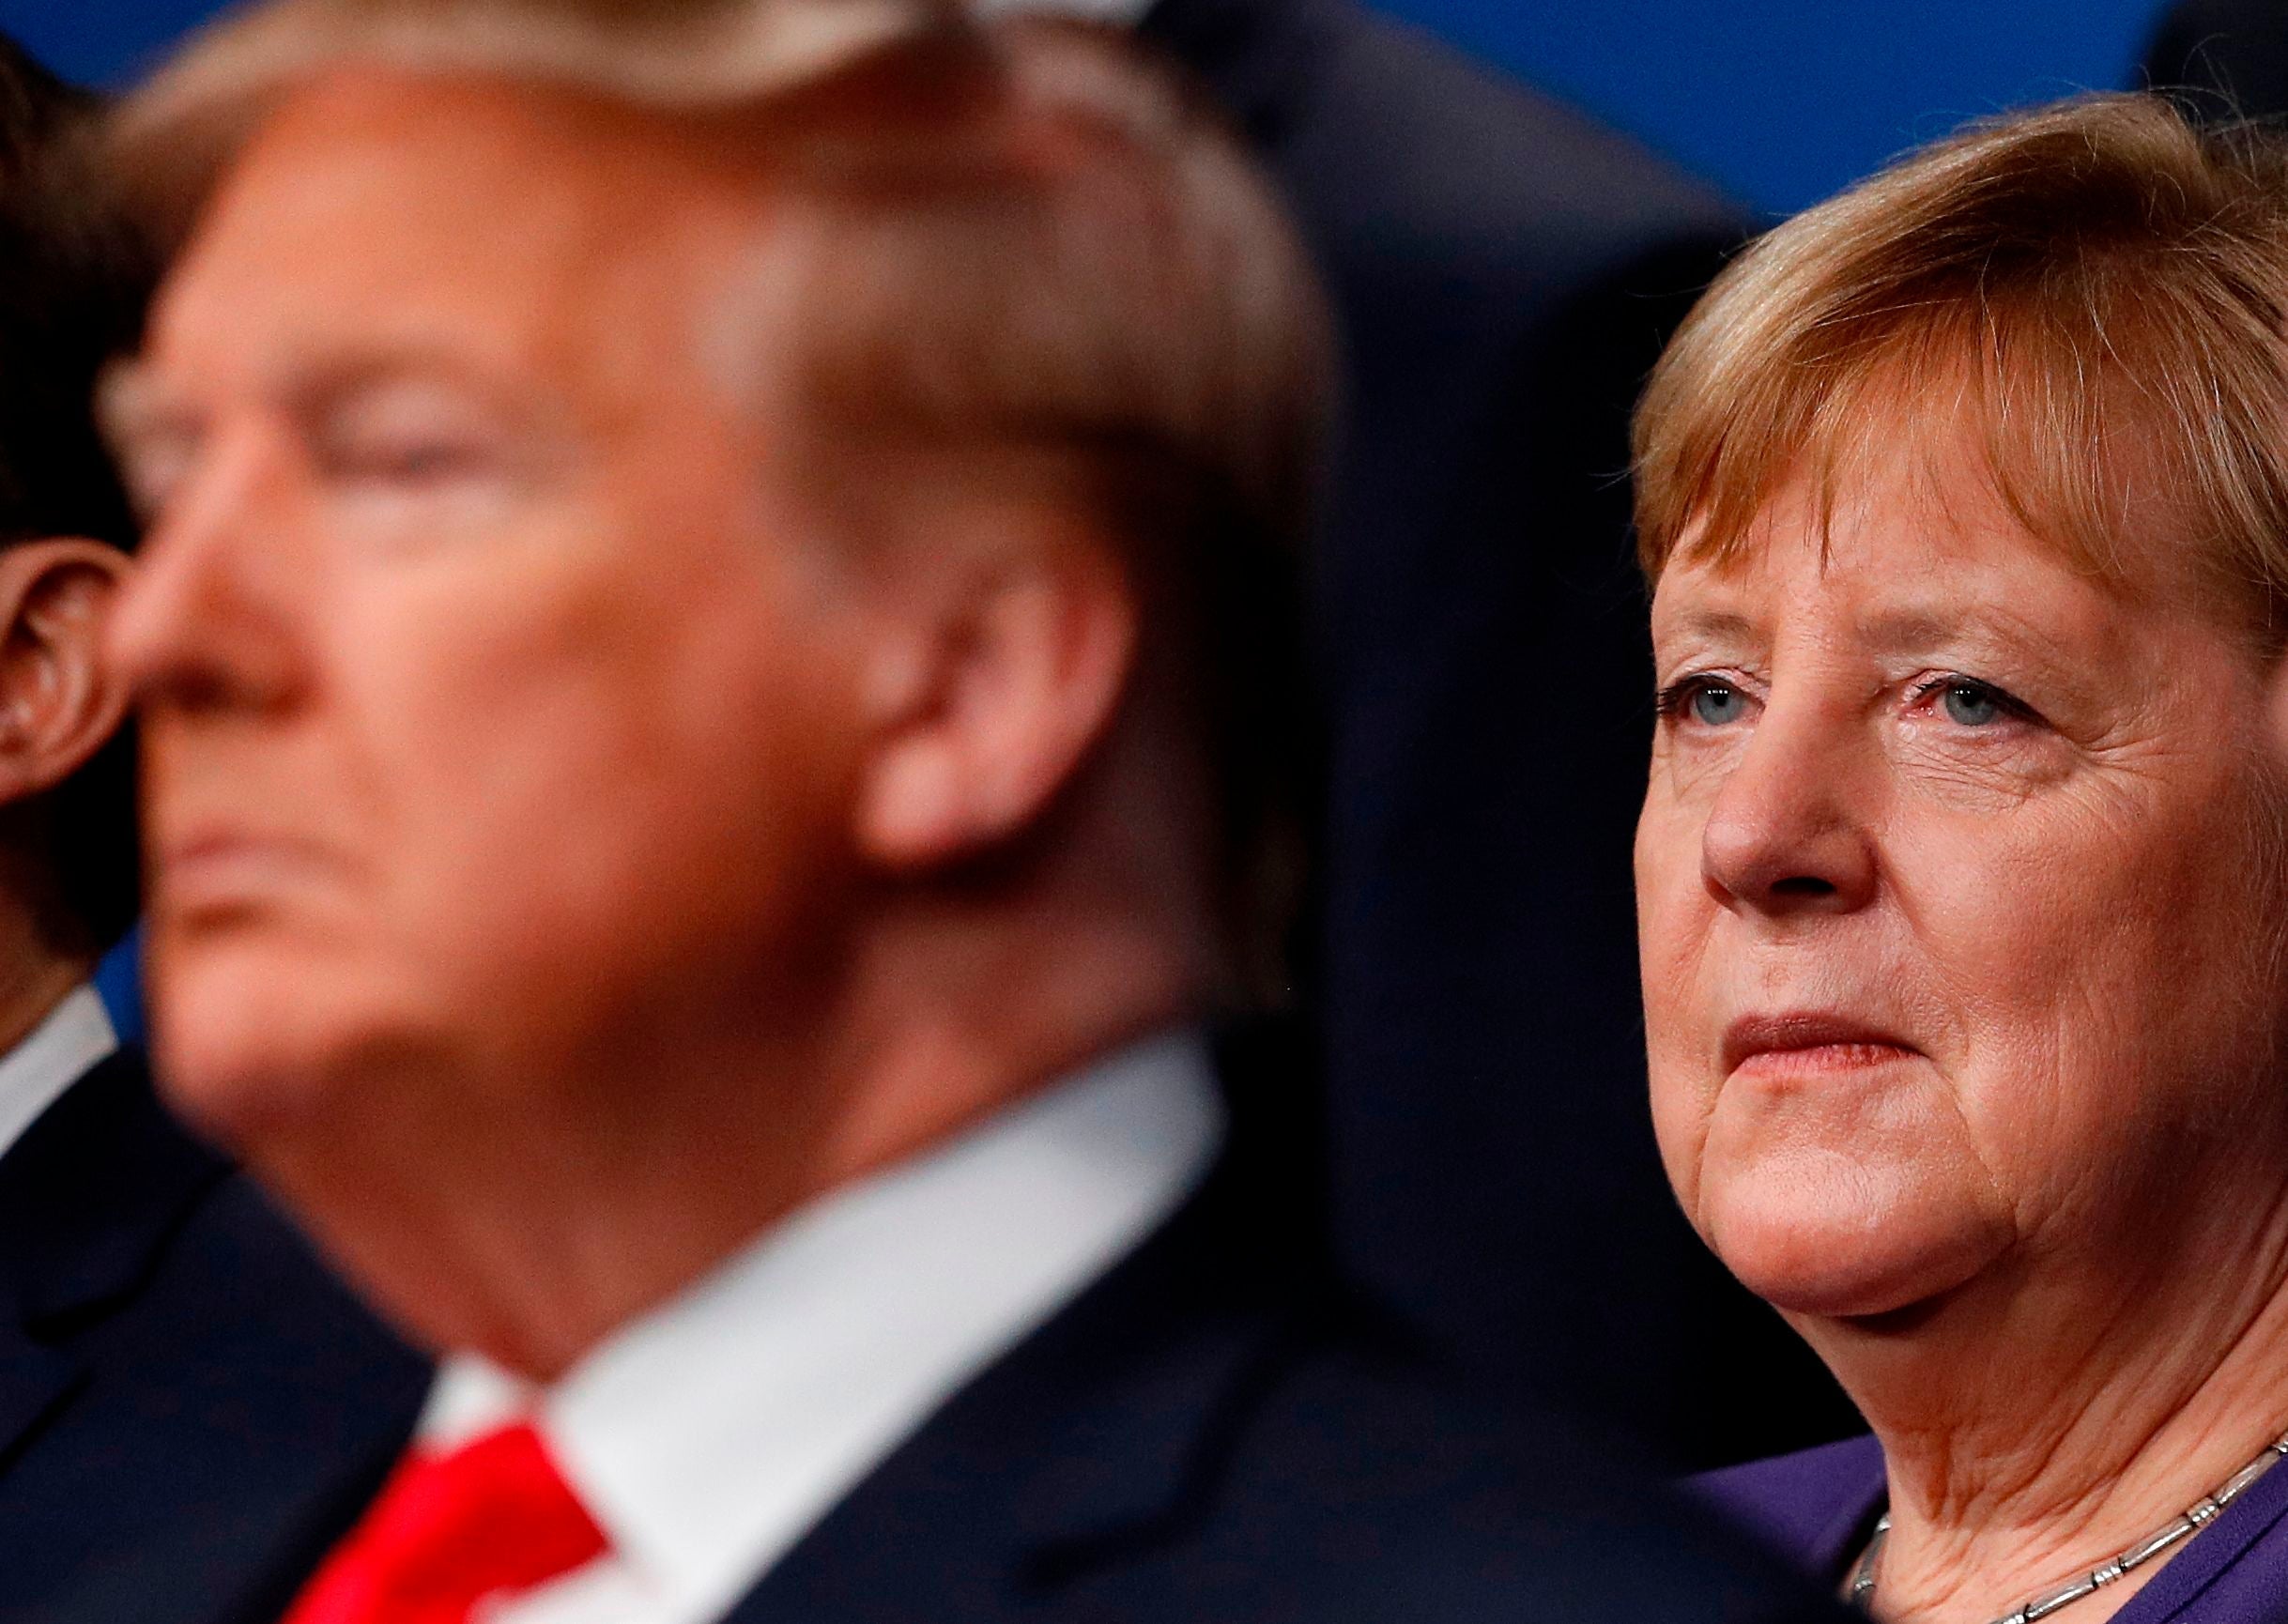 Trump and Merkel do not see eye to eye on many things